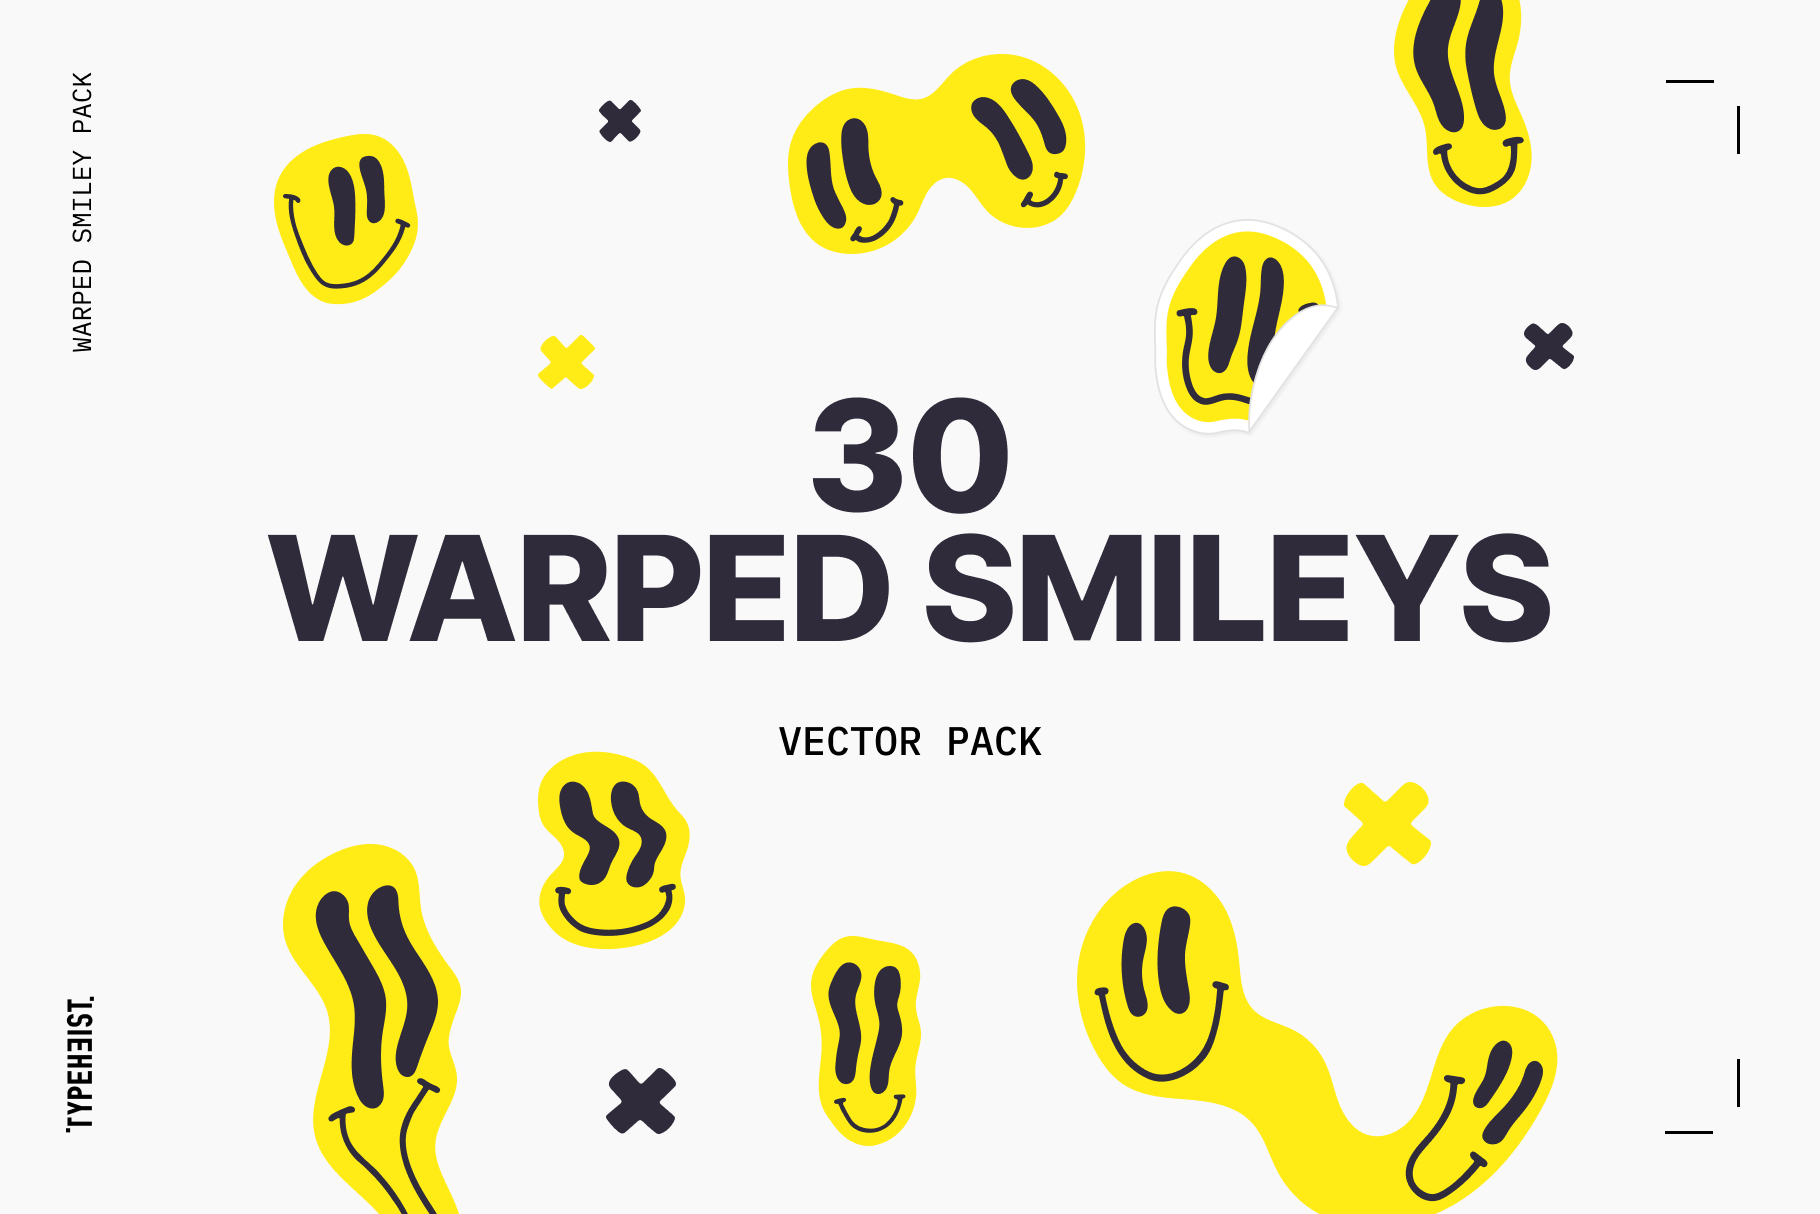 Warped Smiley Vector Pack: A vector pack with 30 warped smiley faces + 20 bonus assets. Good times.